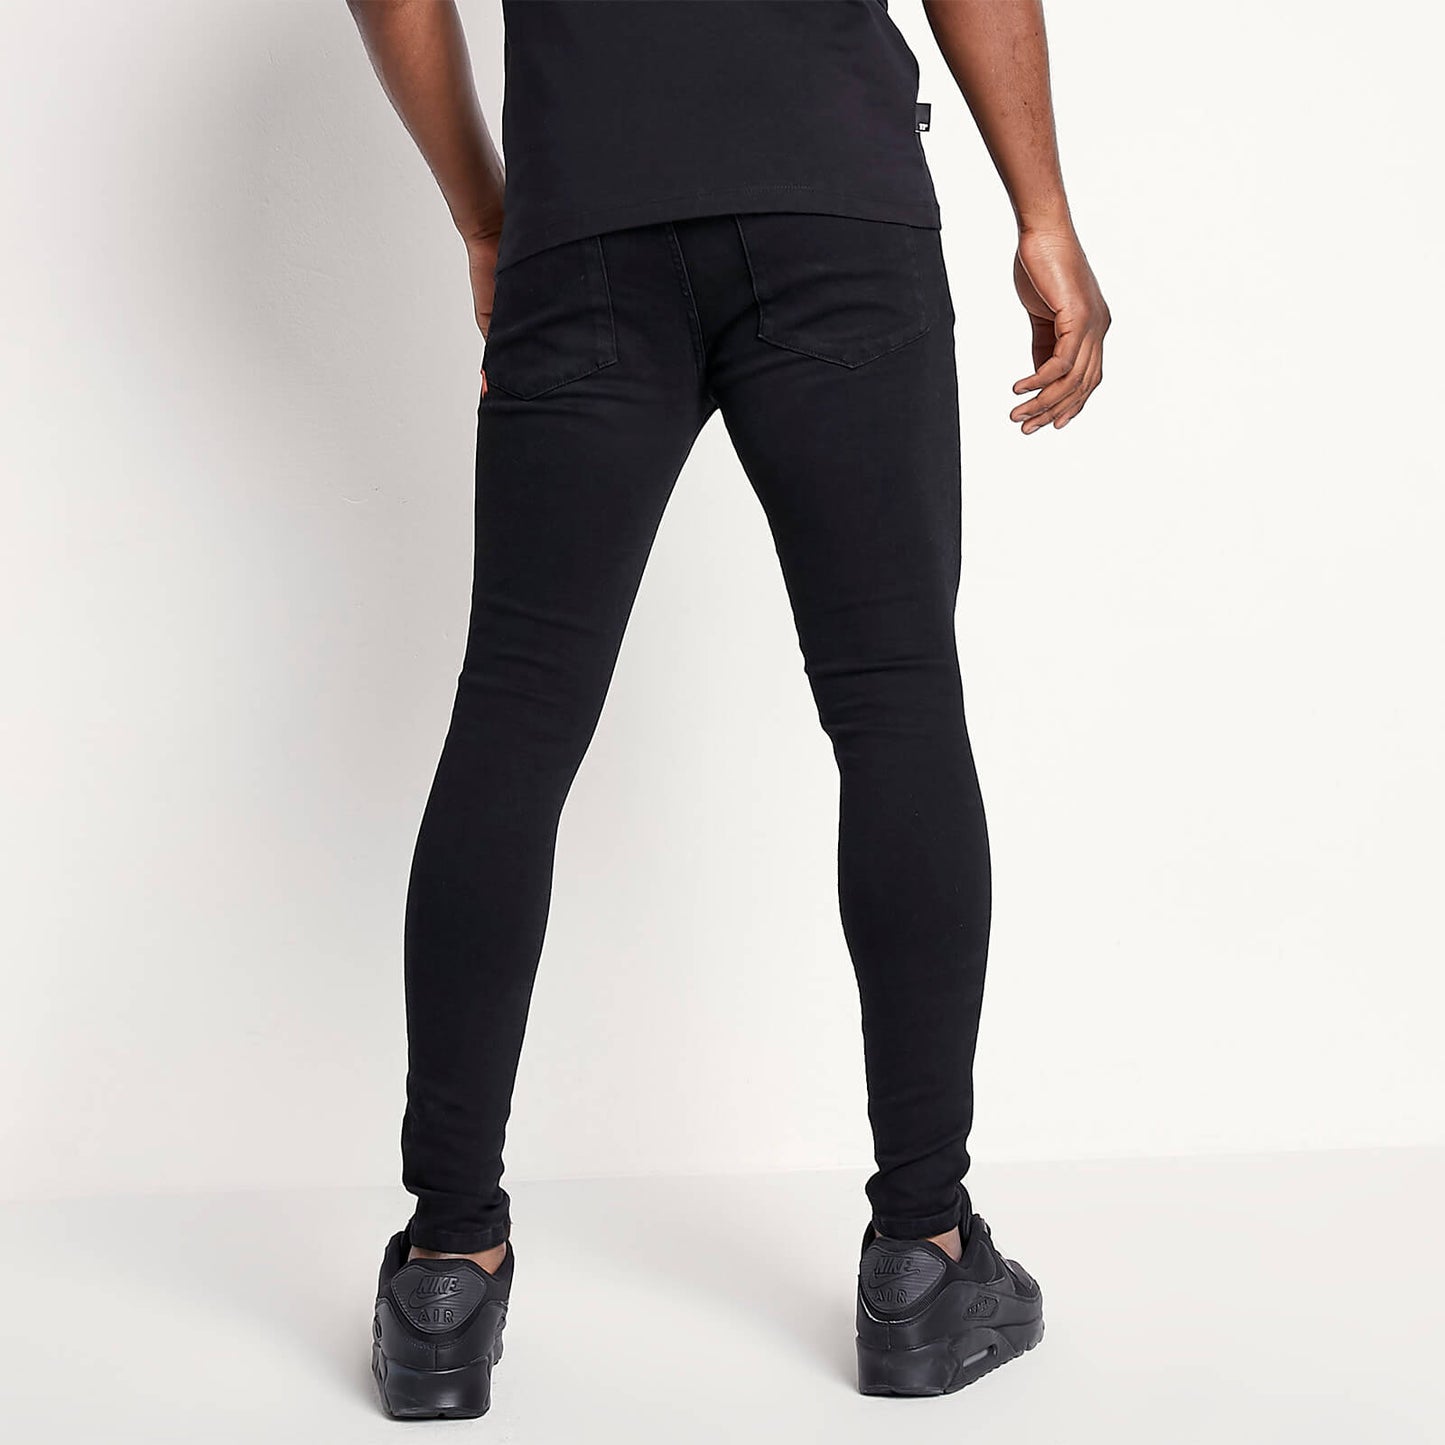 Sustainable Stretch Jeans Skinny Fit - Jet Black Wash